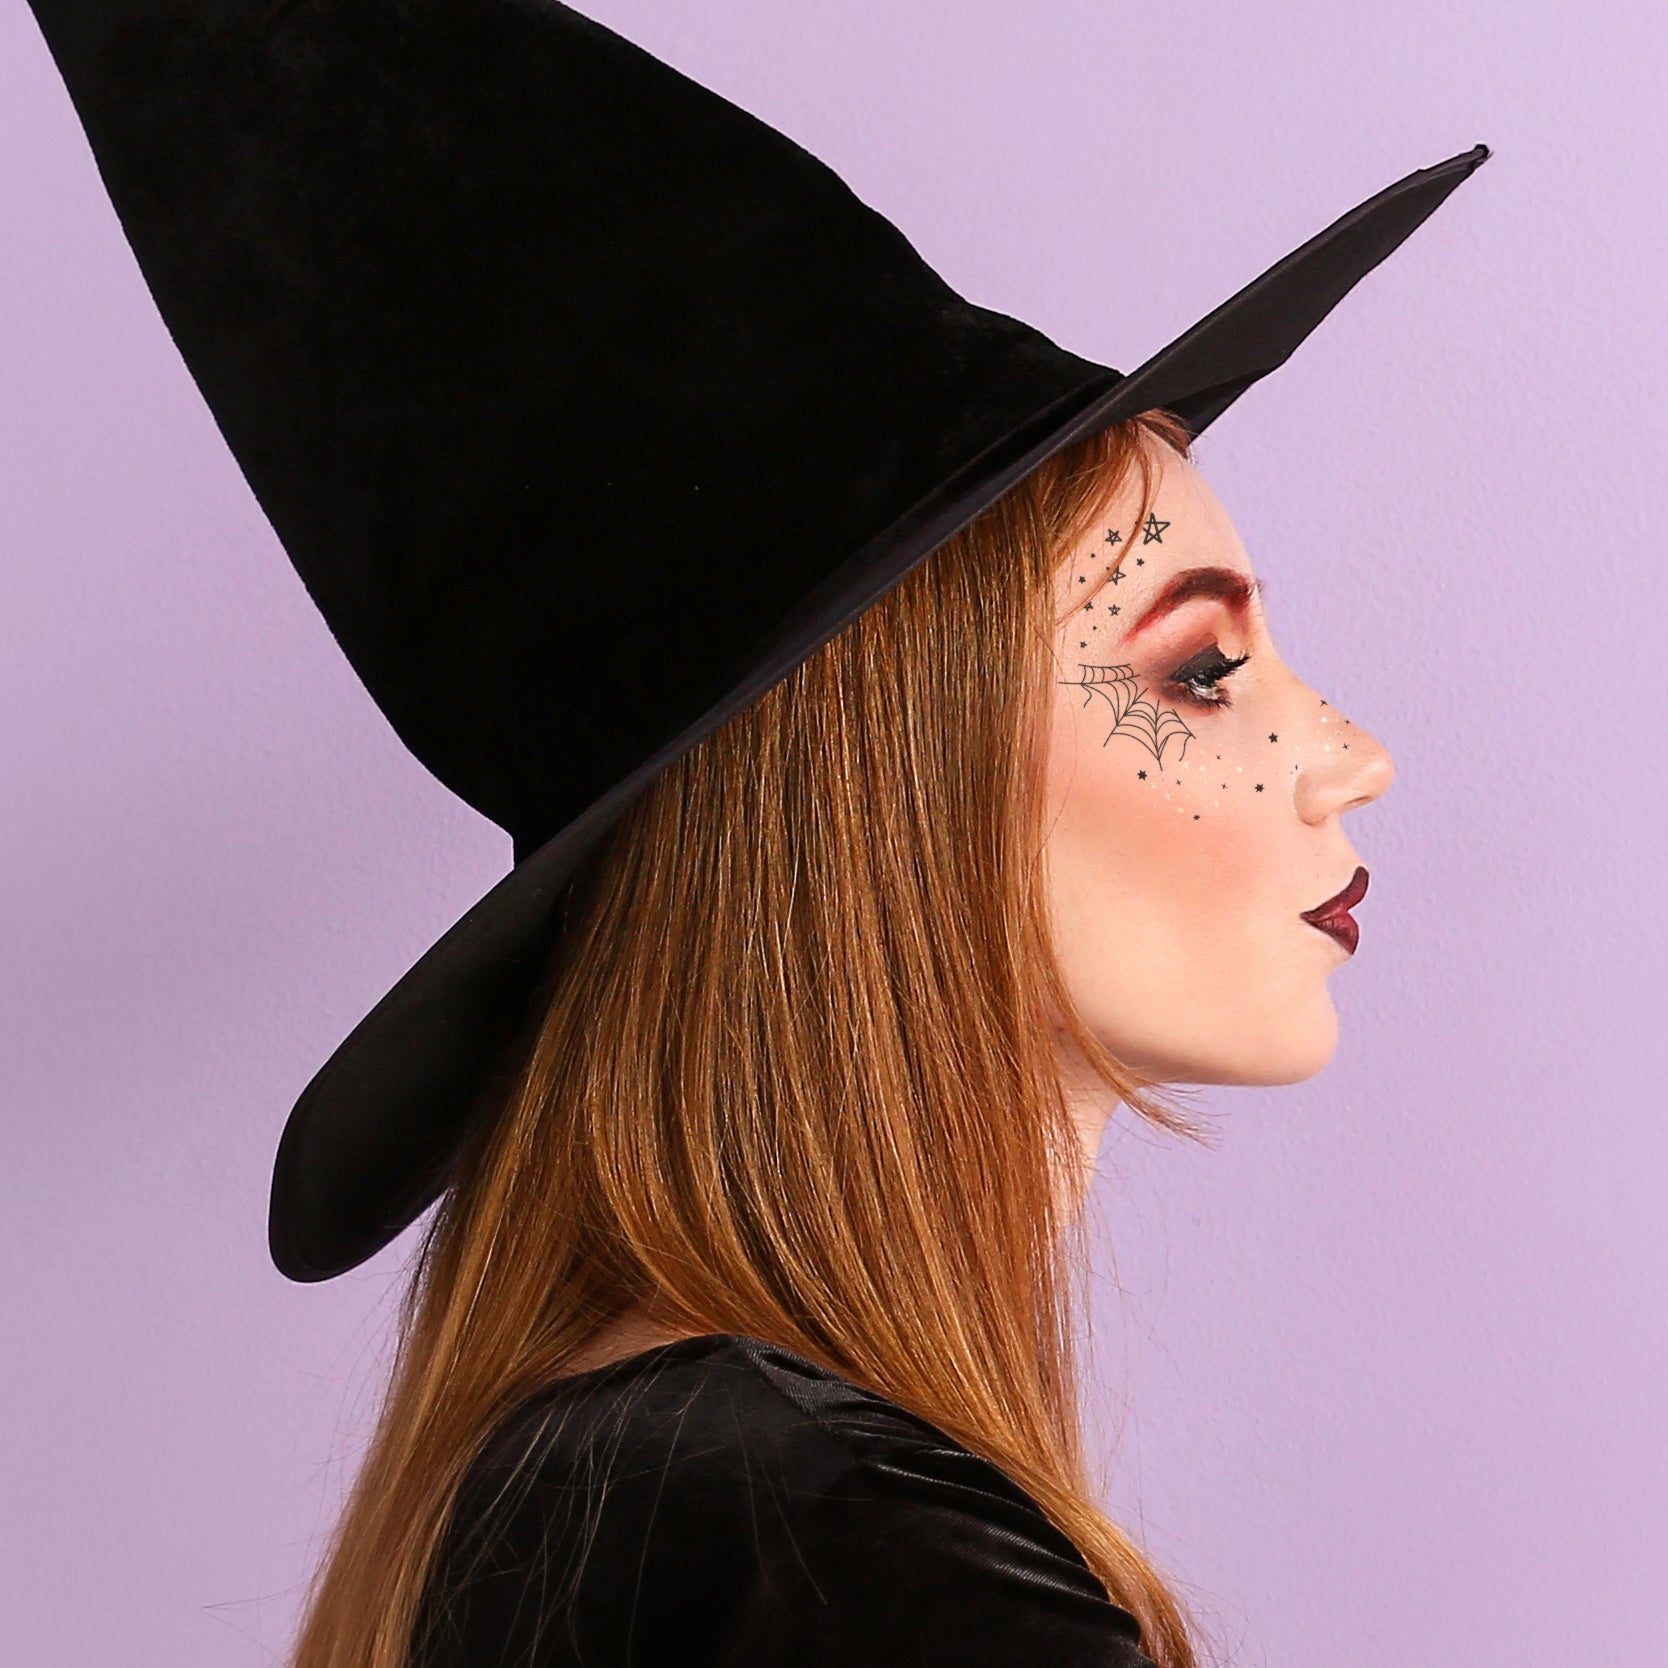 Adorn your cheeks in the Resting Witch Face temporary tattoo set from Flash Tattoos. The ultimate spooky sparkle! 